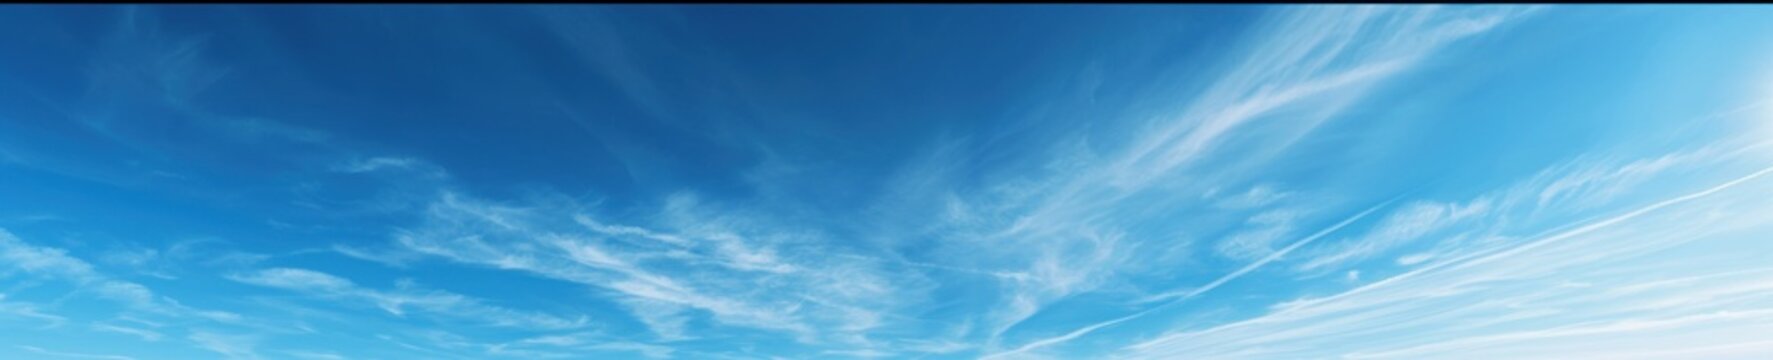 Beautiful blue sky background with clouds. Heaven